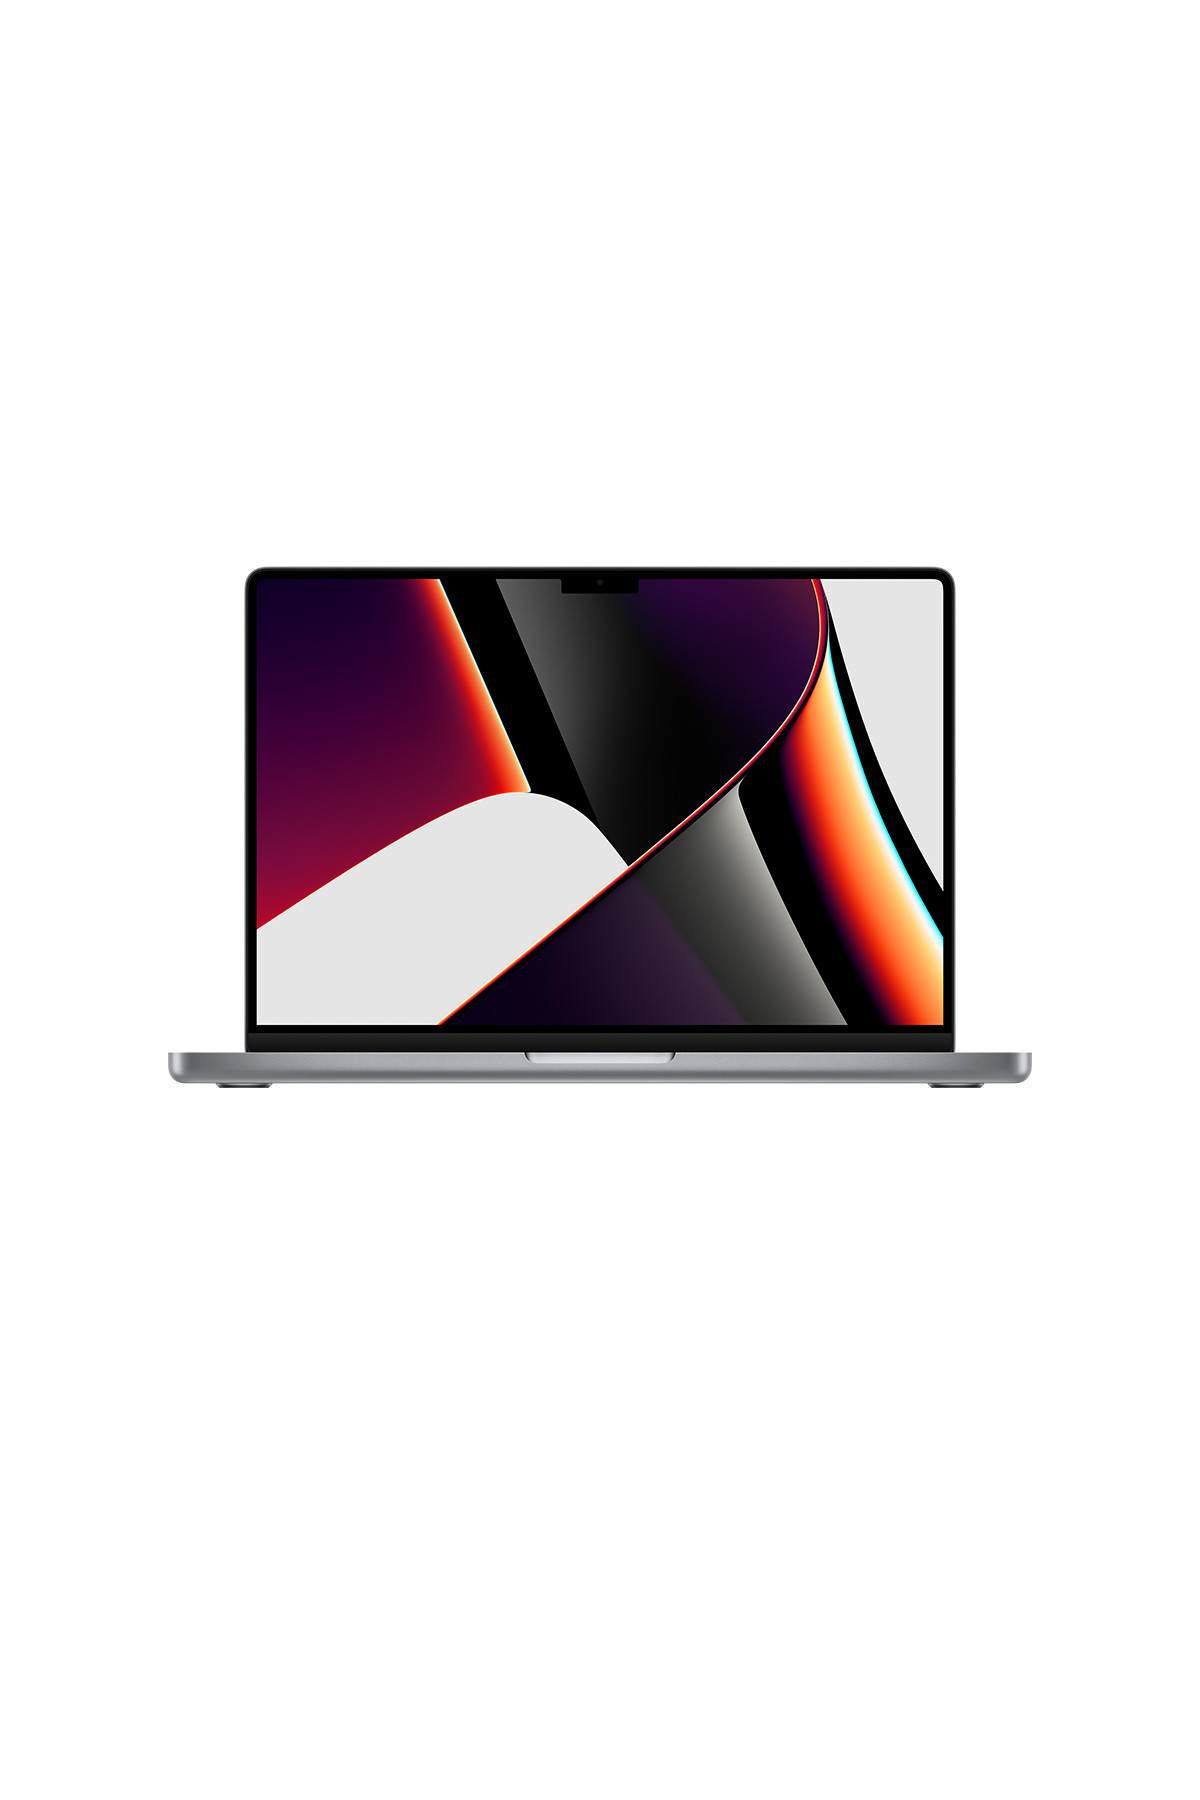 MacBook Pro 14-inch - Space Grey/Apple M1 Pro Chip with 10‑CORE CPU and 16‑CORE GPU/16GB/1TB SSD